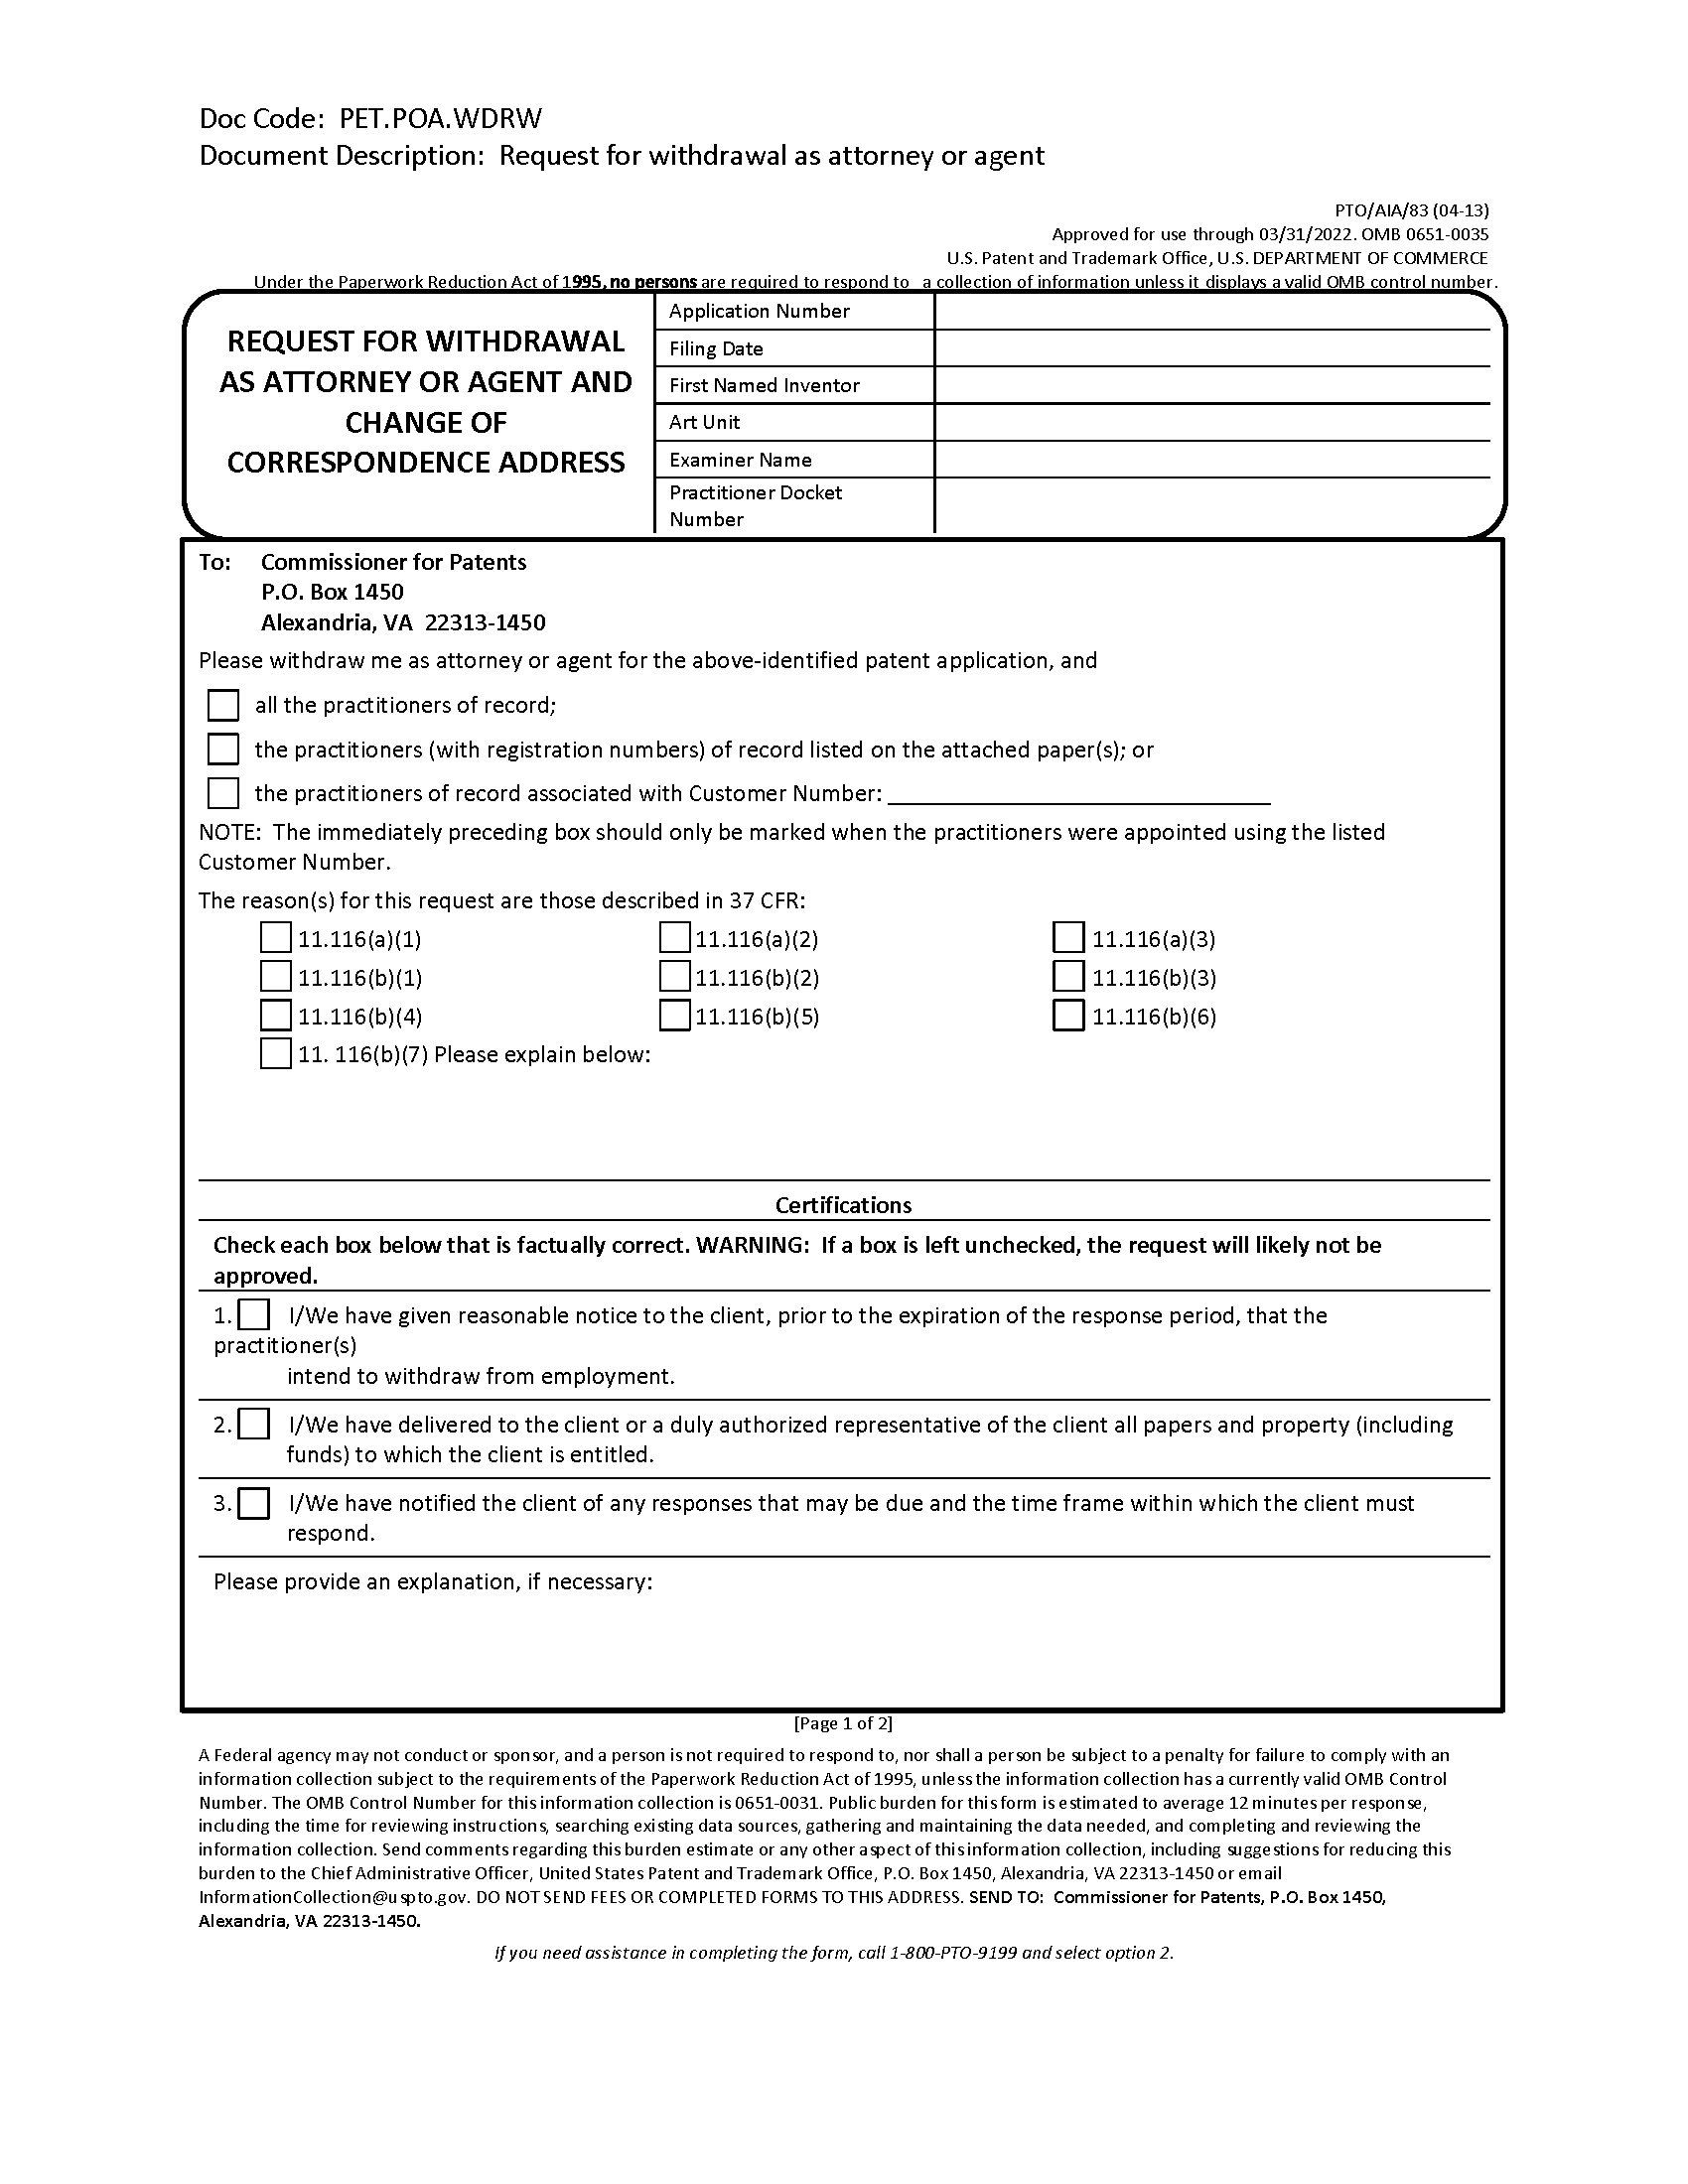 Form PTO/SB/83 Request for Withdrawl As Attorney or Agent and Change of Correspondence Address Form